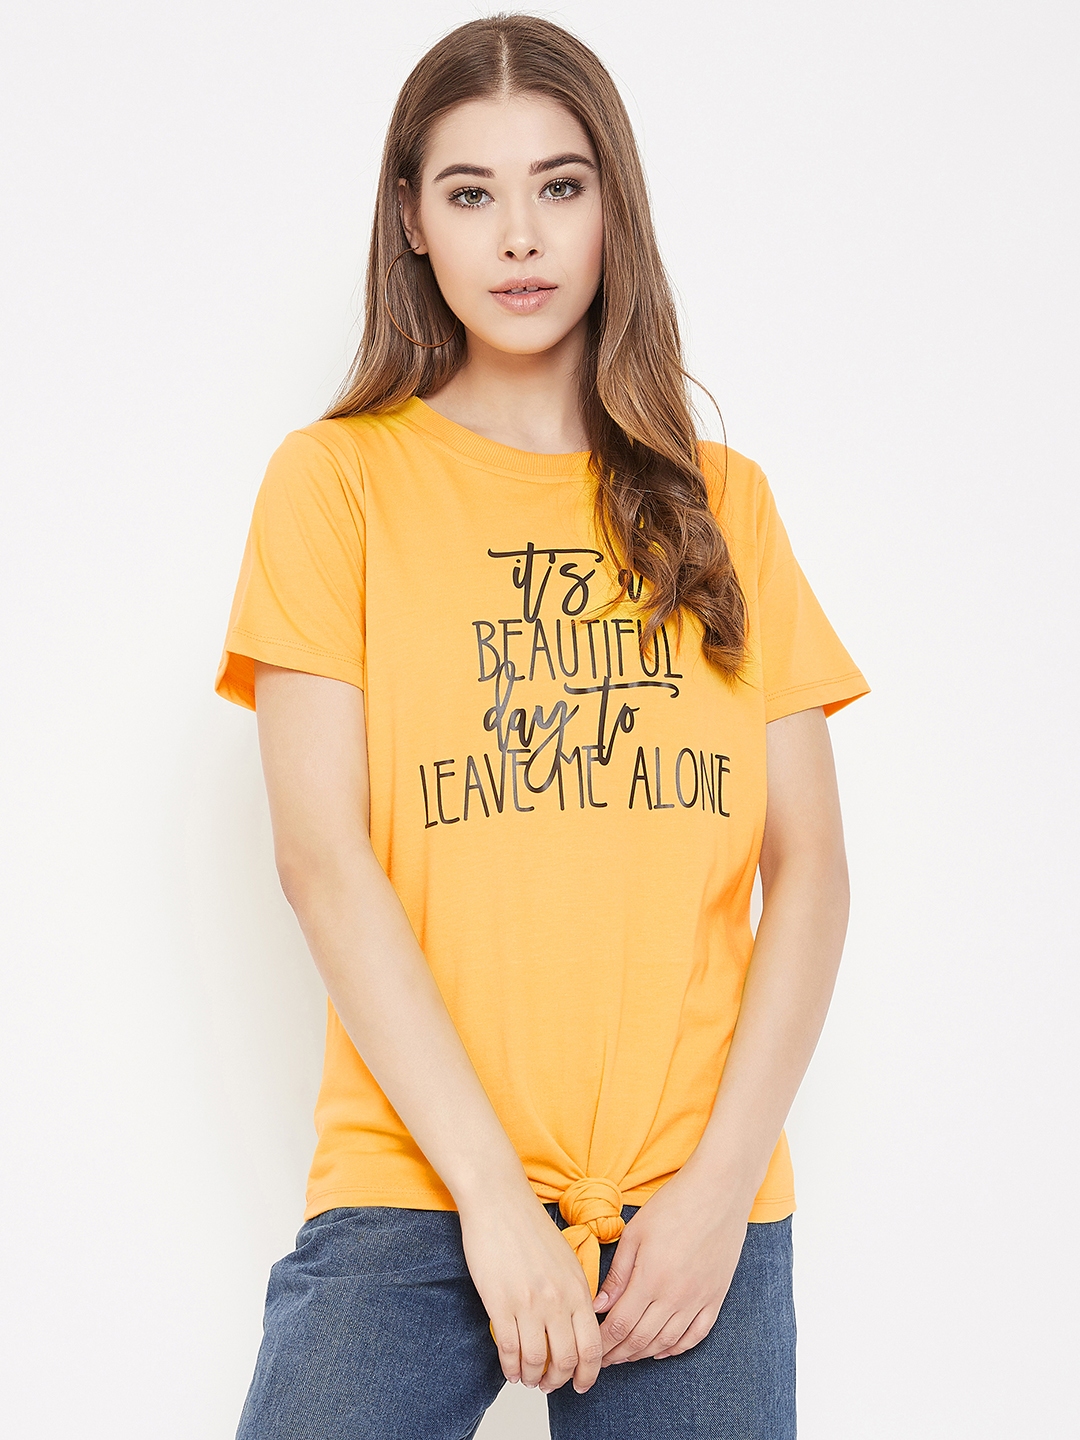 ROUND NECK PRINTED T-SHIRT WITH FRONT KNOT STYLE - Offline2Online